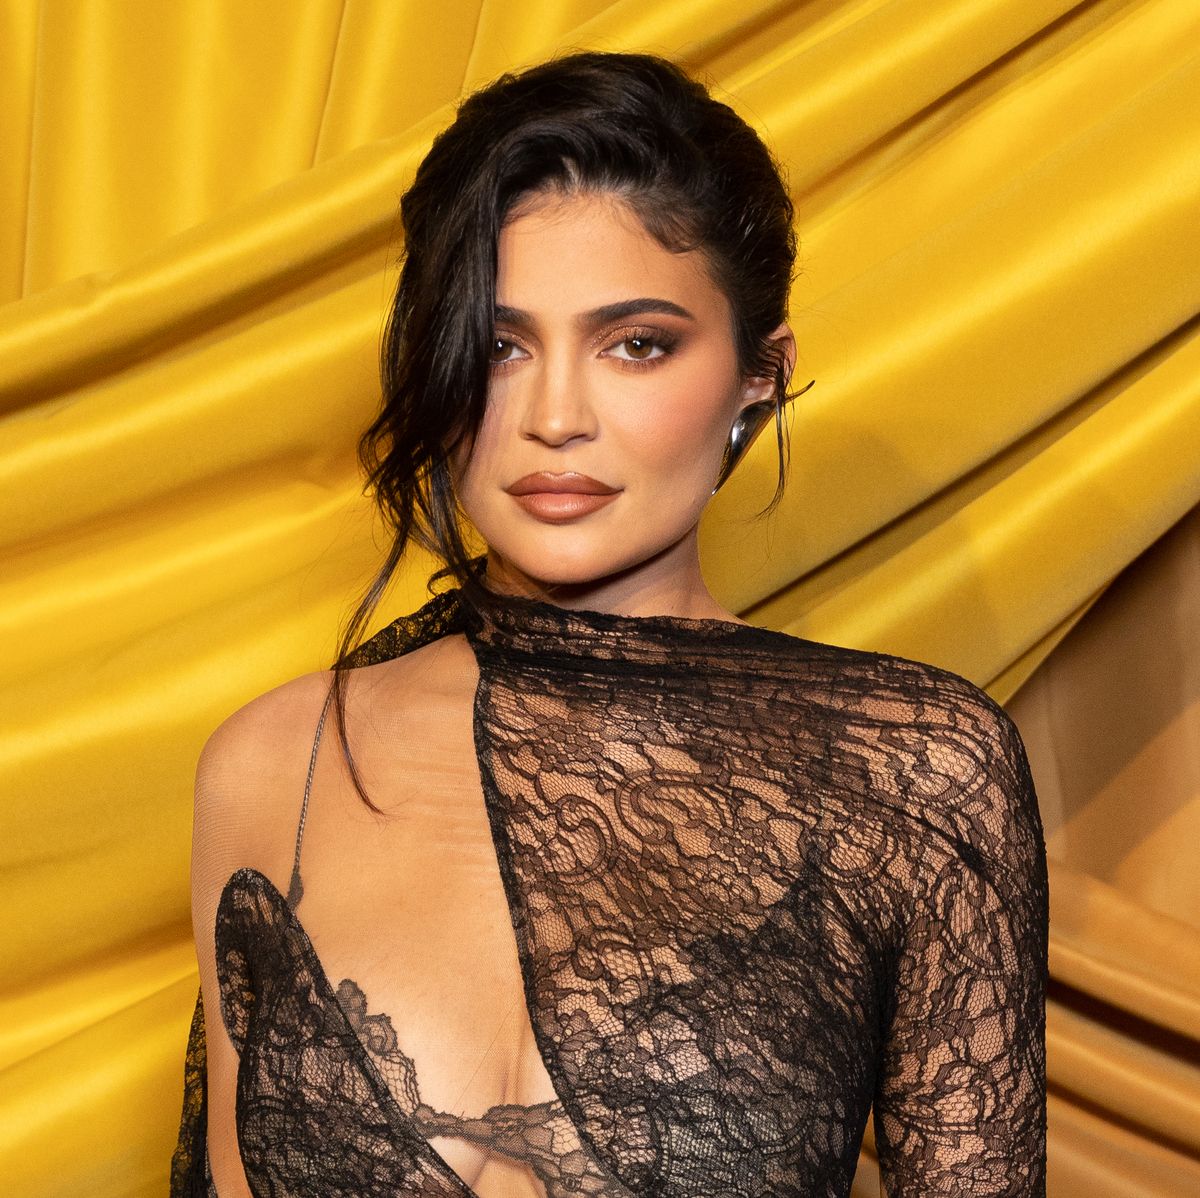 https://hips.hearstapps.com/hmg-prod/images/kylie-jenner-attends-the-bof500-gala-during-paris-fashion-news-photo-1665524930.jpg?crop=0.668xw:1.00xh;0.167xw,0&resize=1200:*